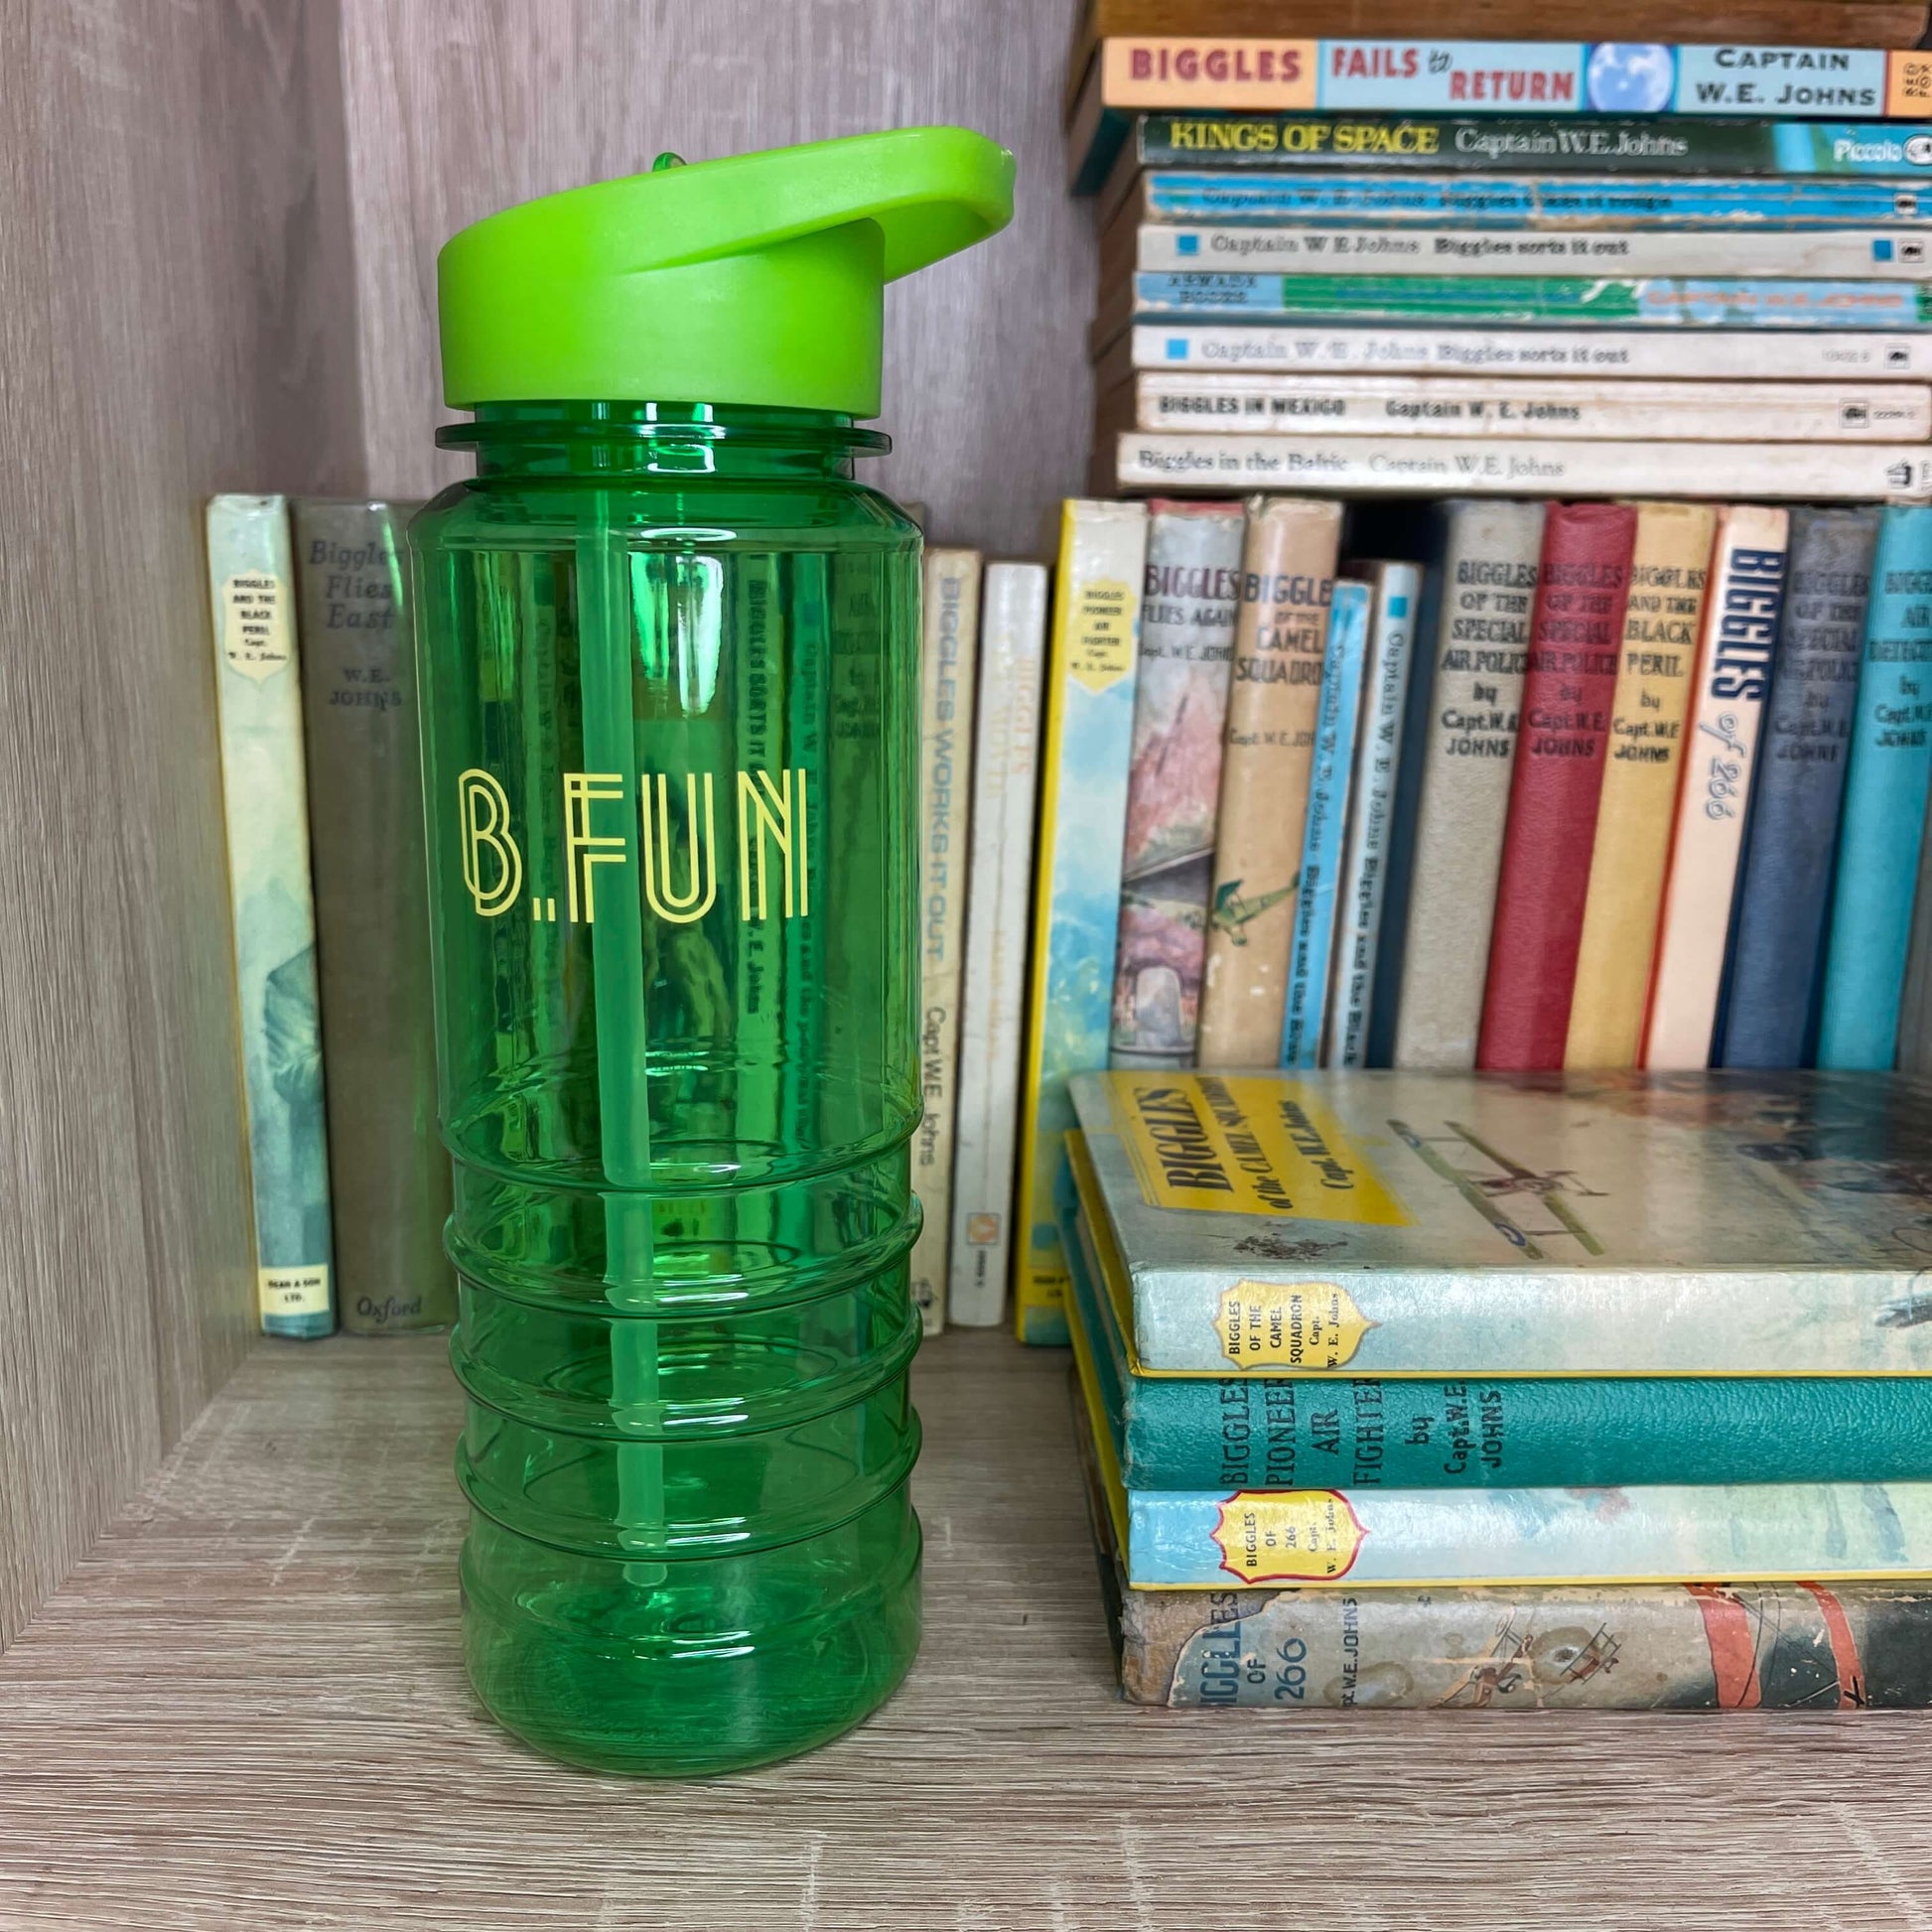 Bright green plastic sports water bottle with B=Fun printed on it sitting on a book shelf next to vintage books.